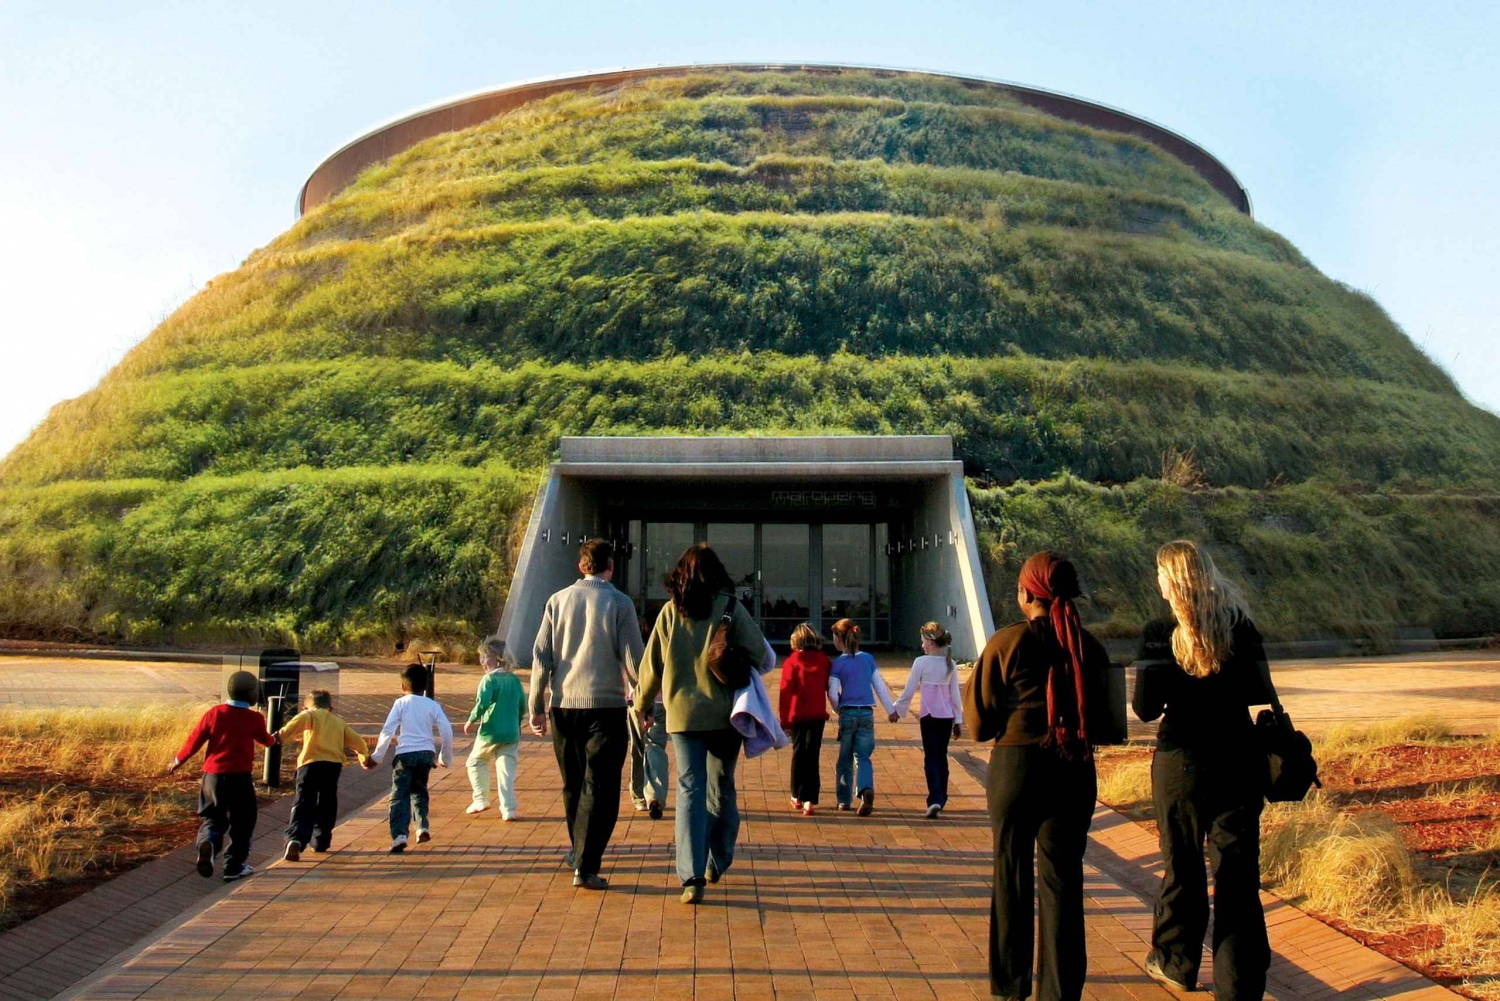 cradle of humankind day tour